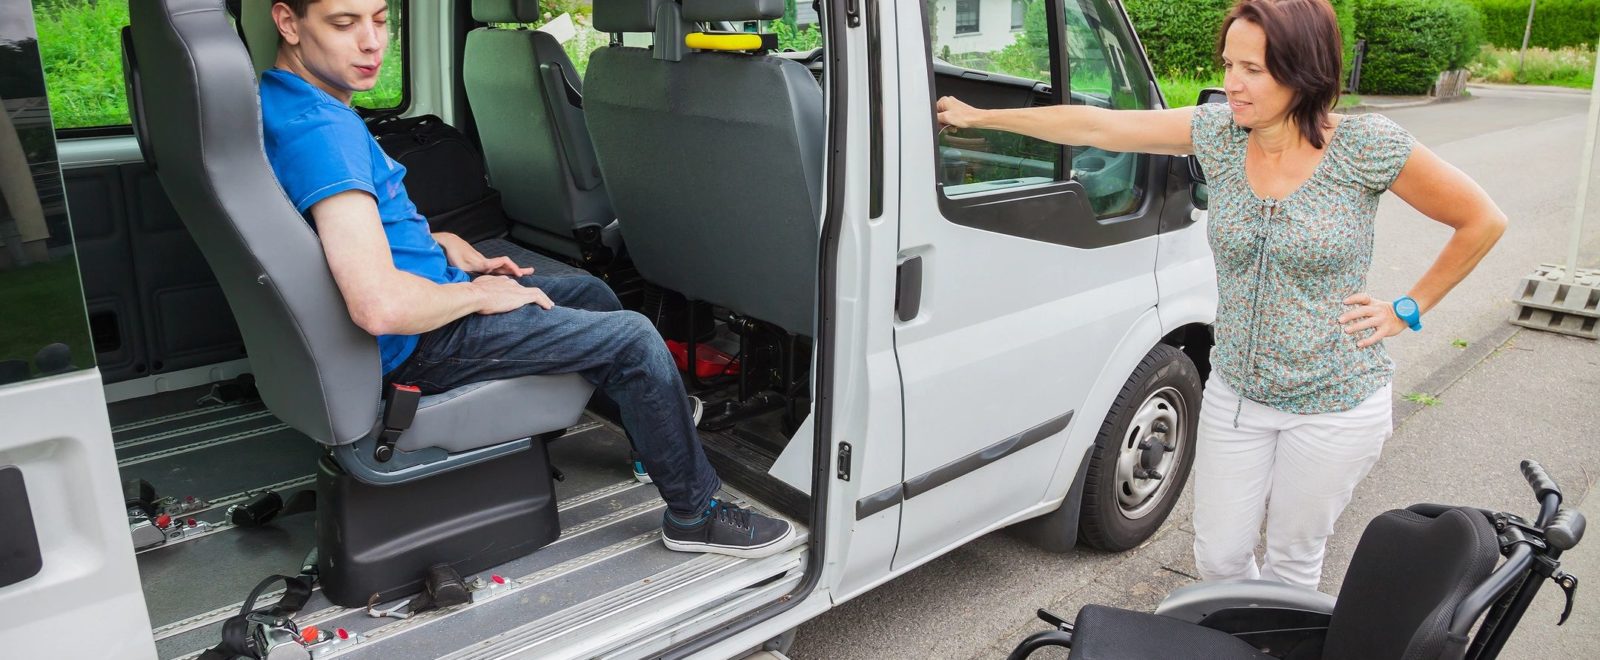 Wheelchair user exiting an accessible vehicle